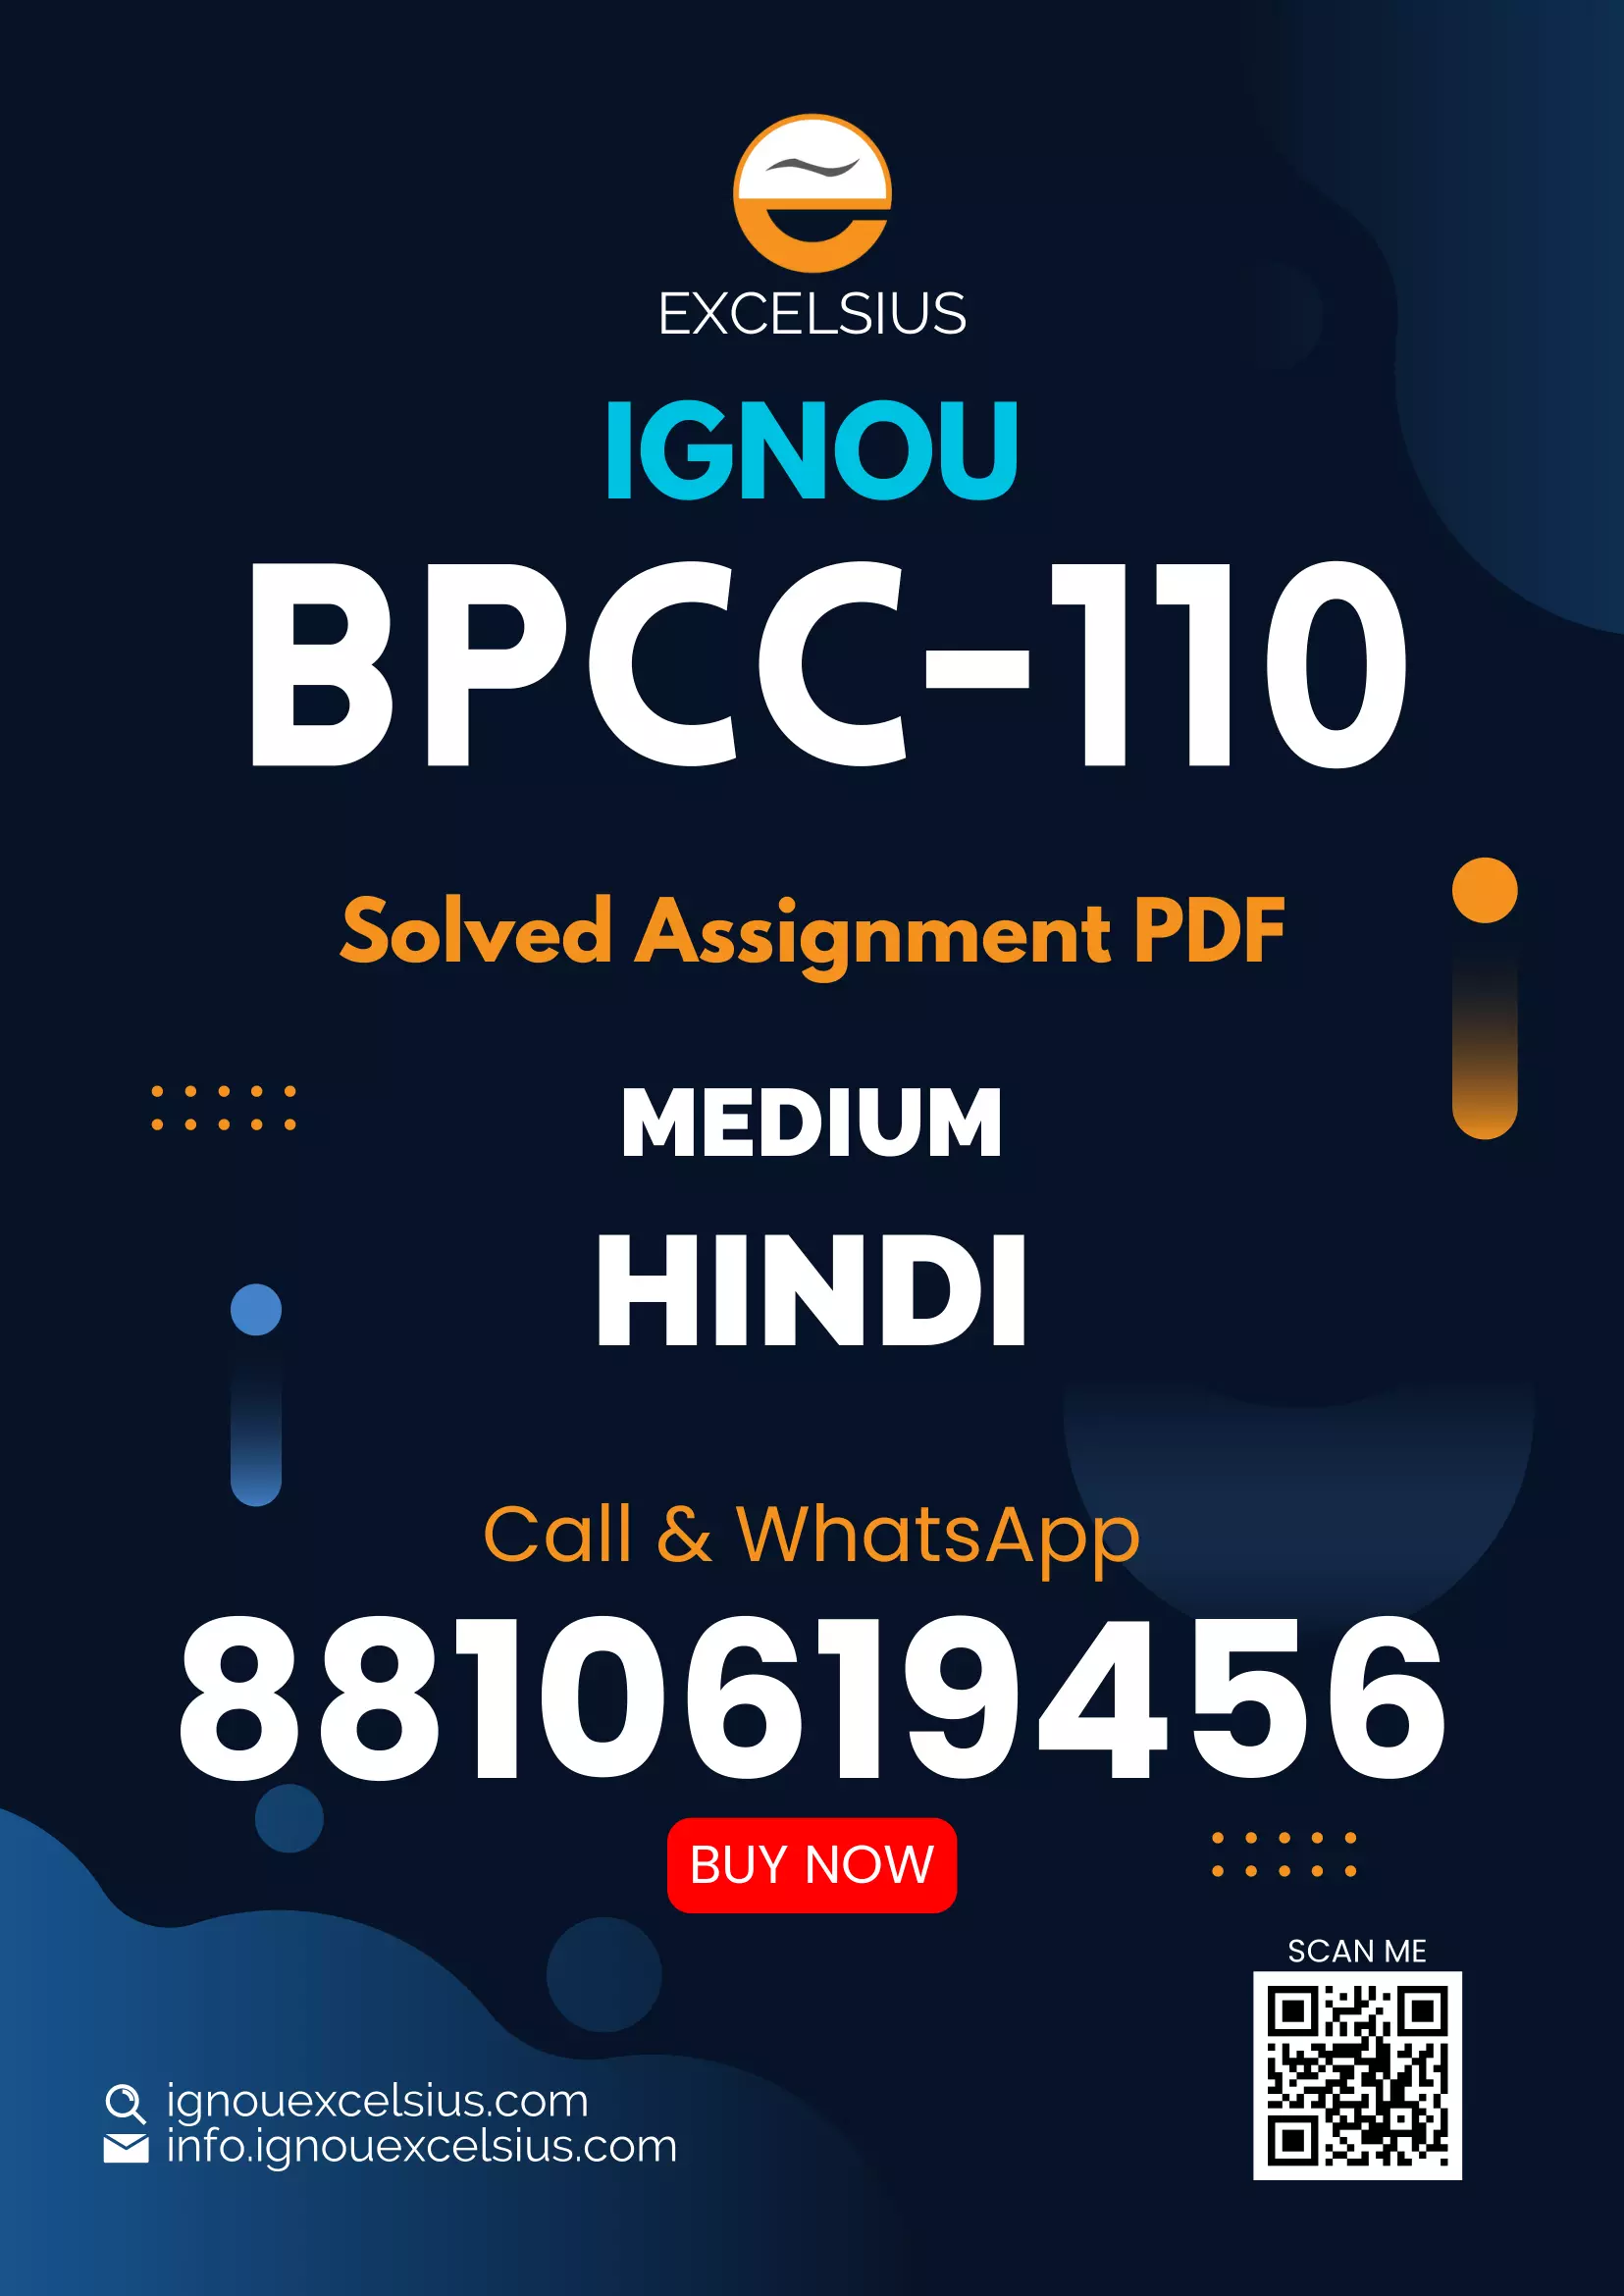 IGNOU BPCC-110 - Applied Social Psychology, Latest Solved Assignment-July 2022 – January 2023